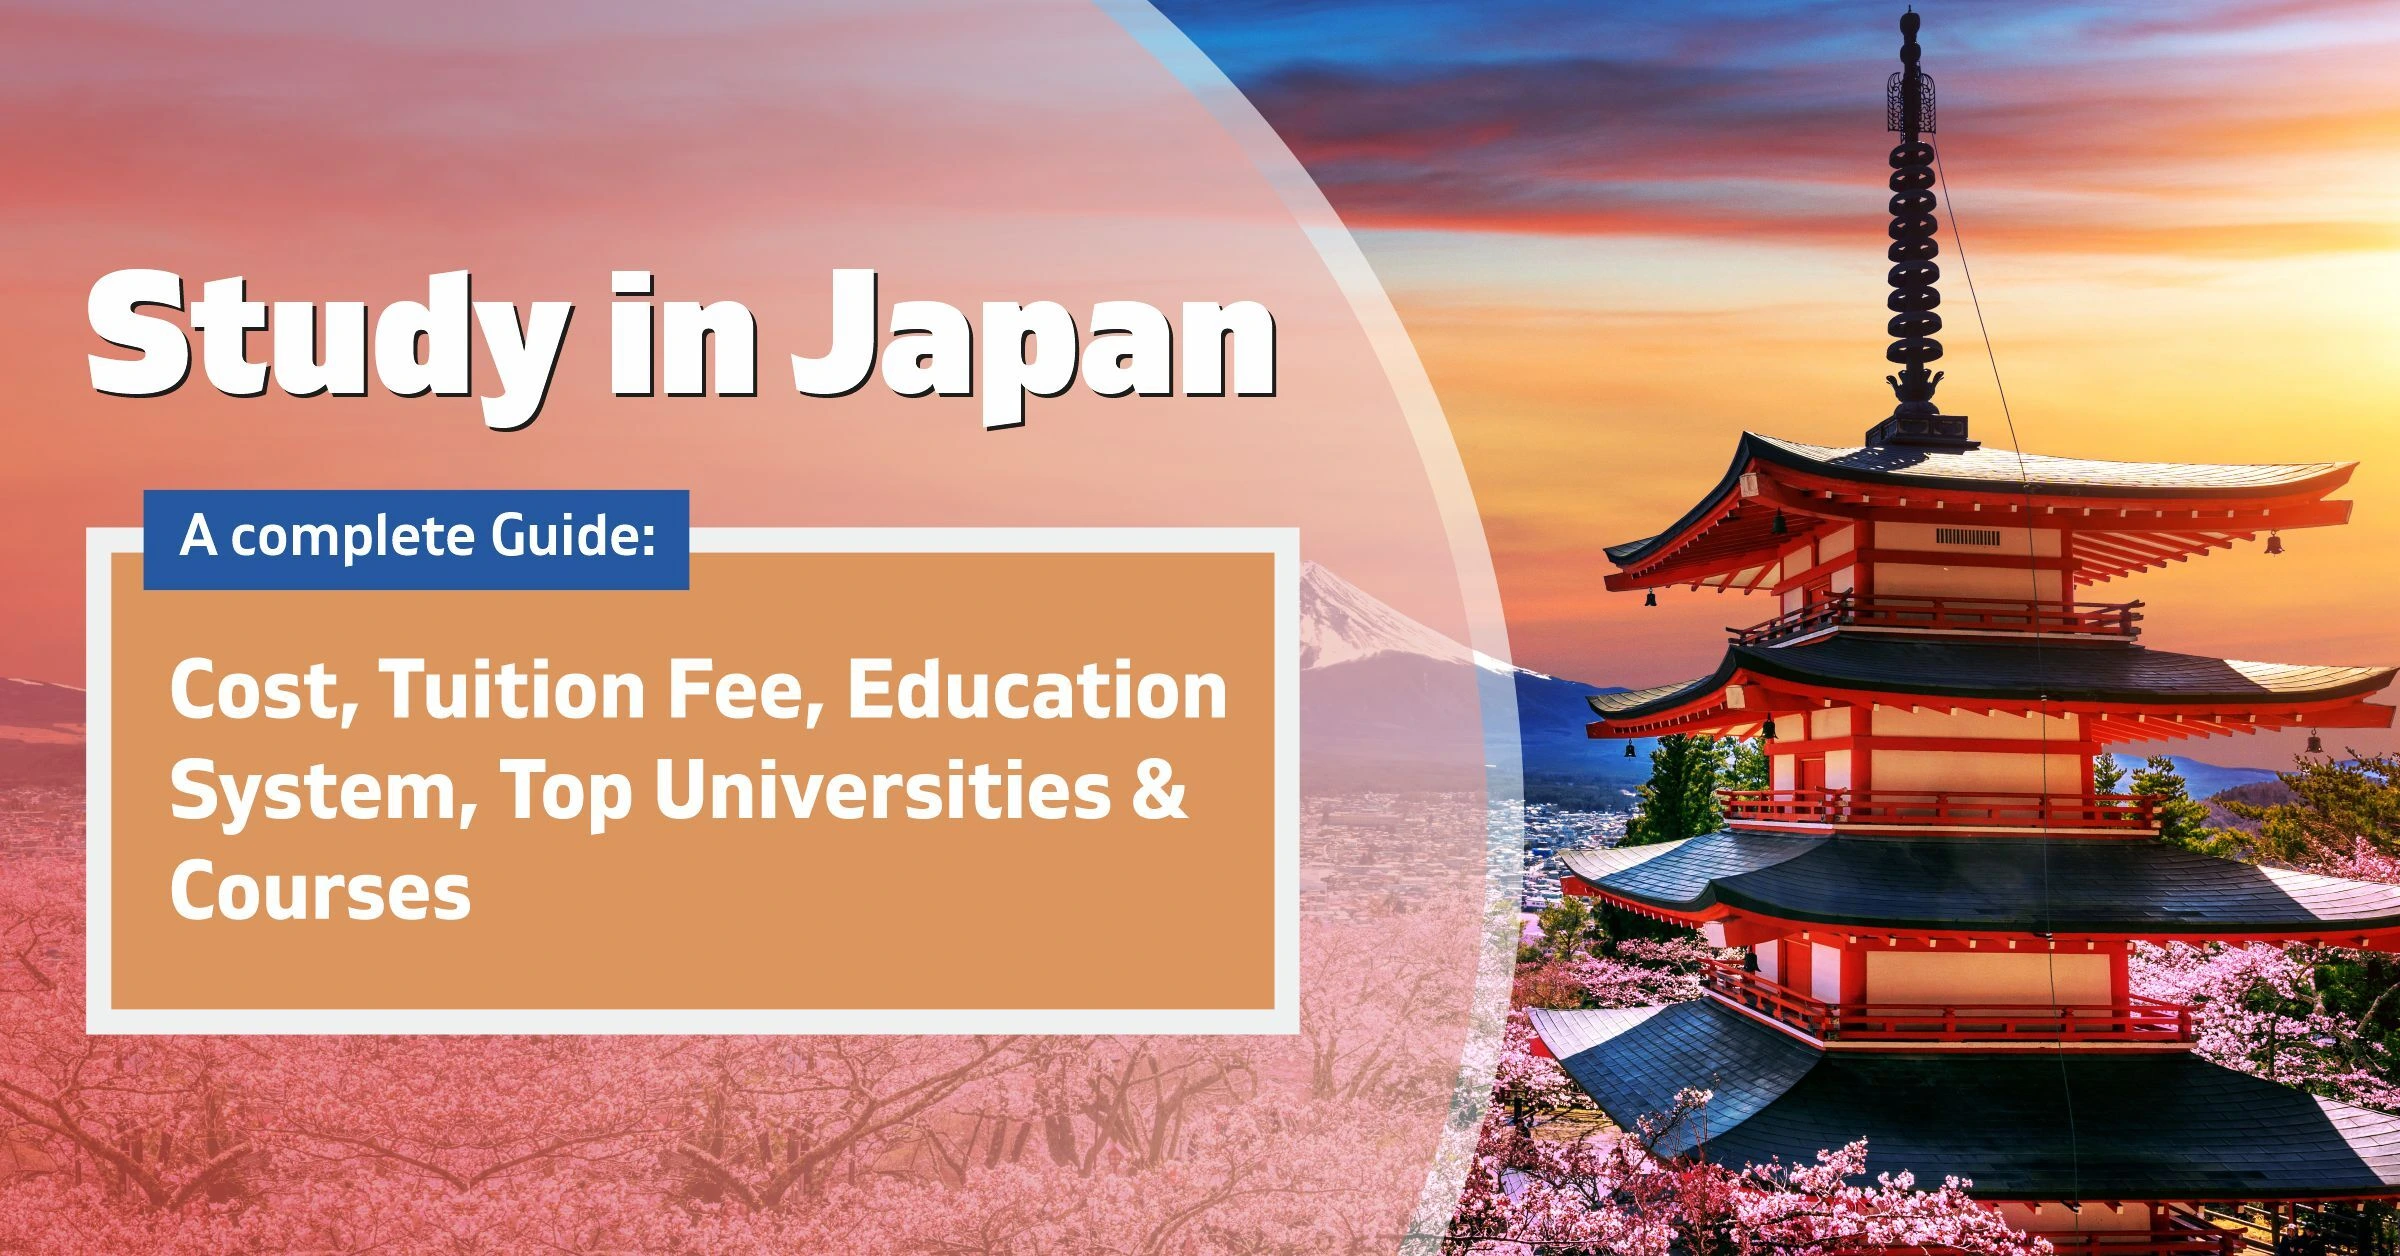 Study in Japan: A complete guide: Cost, Tuition Fee, Education System, Top universities & Courses